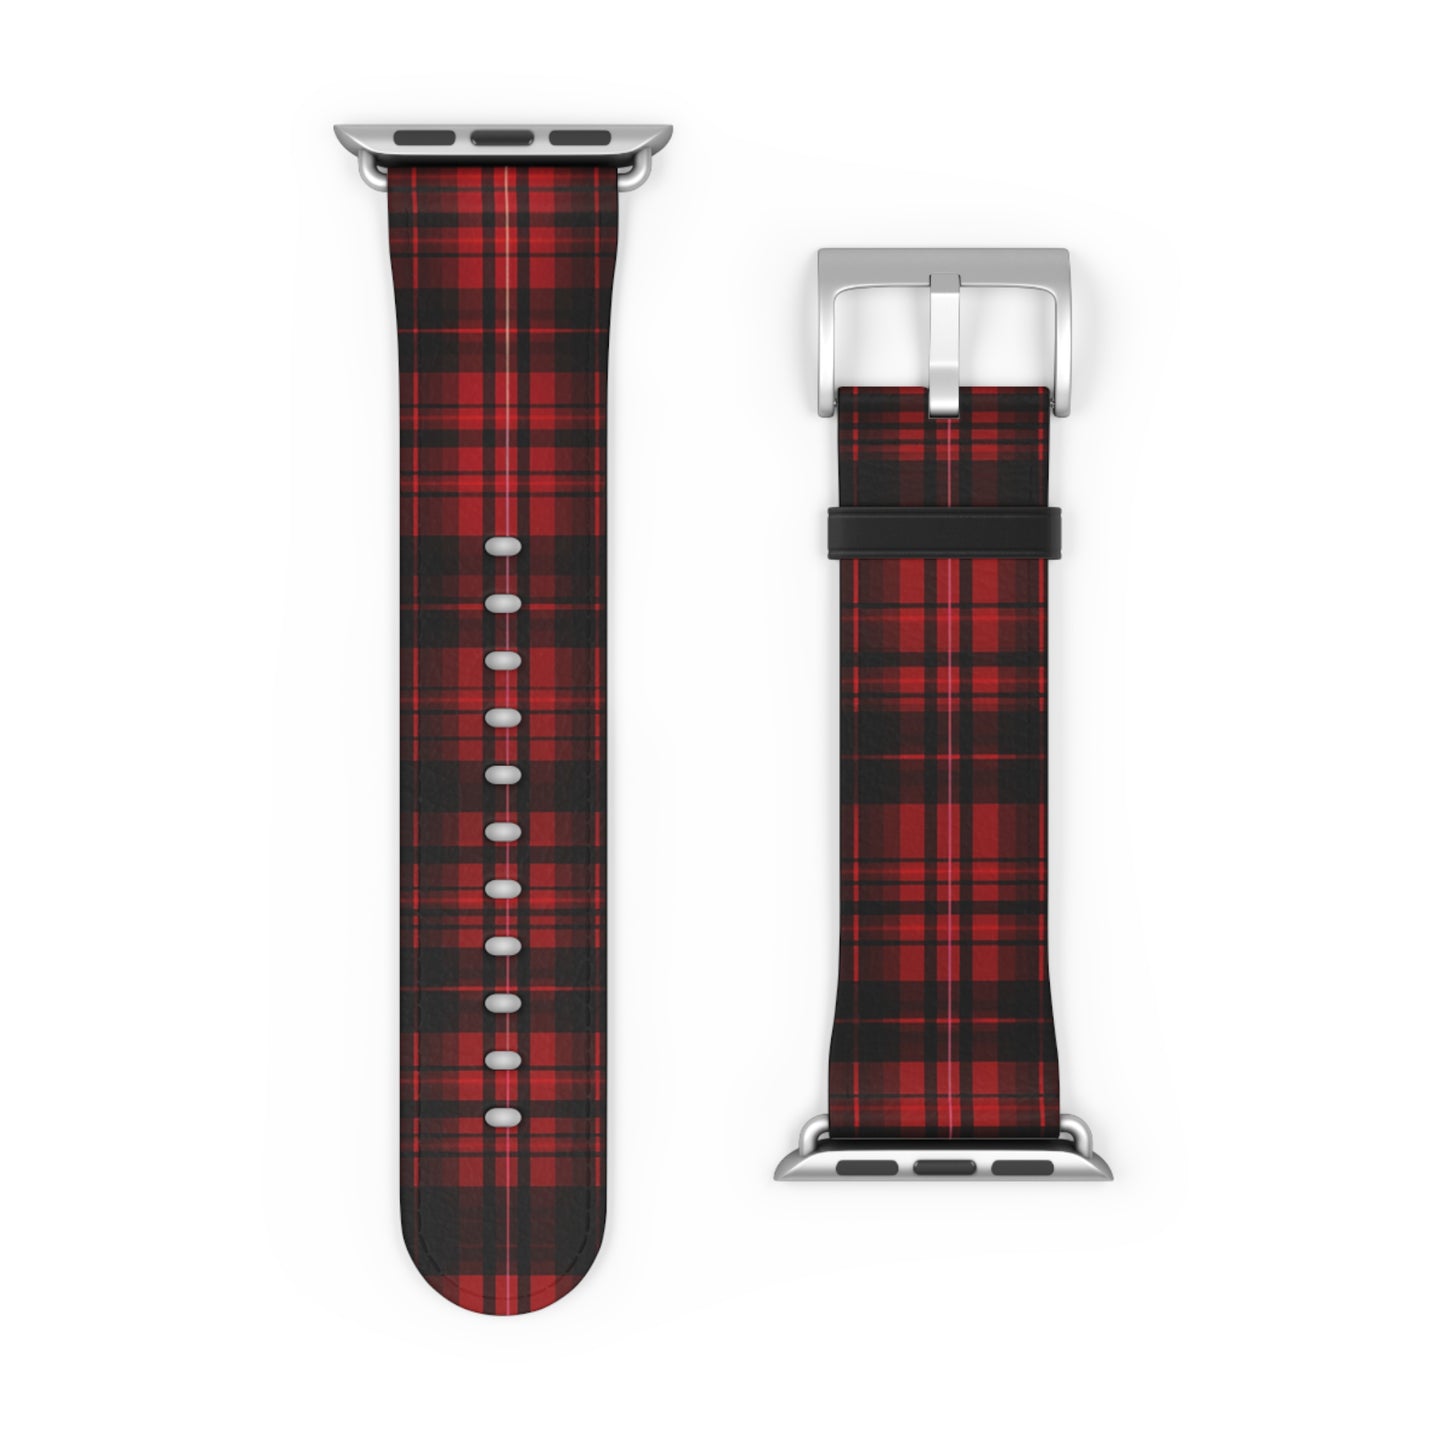 Apple Watch Strap - Cherry Red Tartan | Faux Leather | Gold Rose-Gold Silver Black Fittings | Vegan Leather | Acid Green | 2024